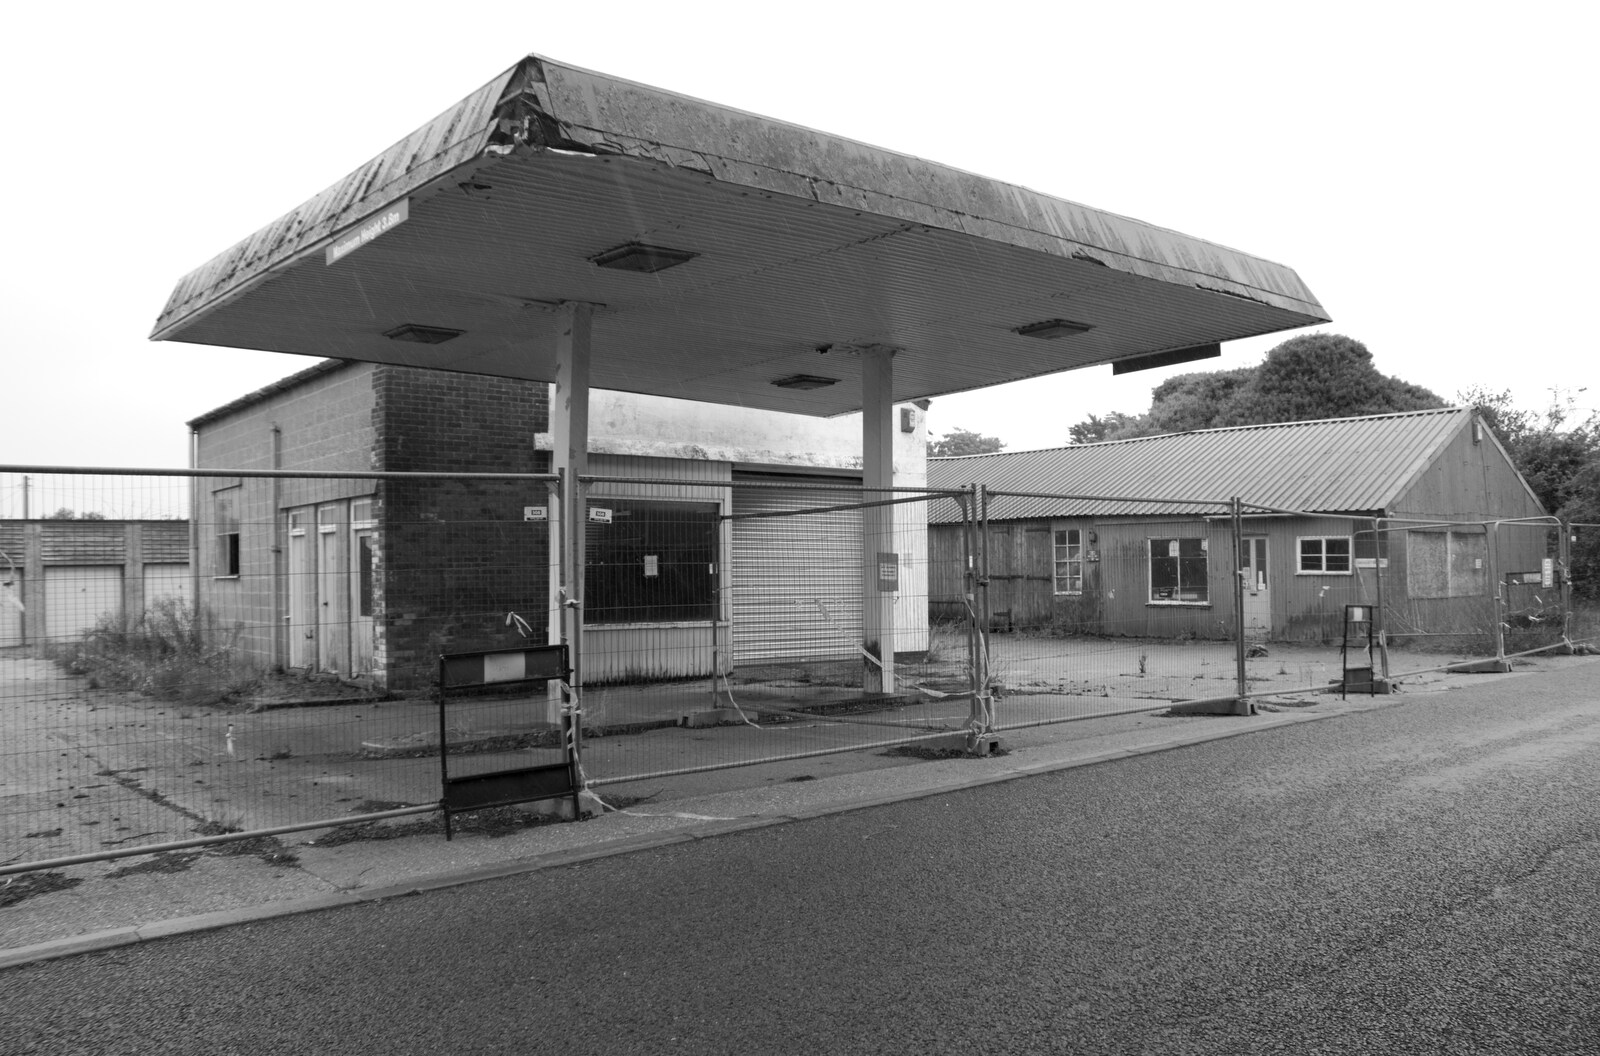 The derelict Orford petrol station from A Trip to Orford, Suffolk - 29th August 2020